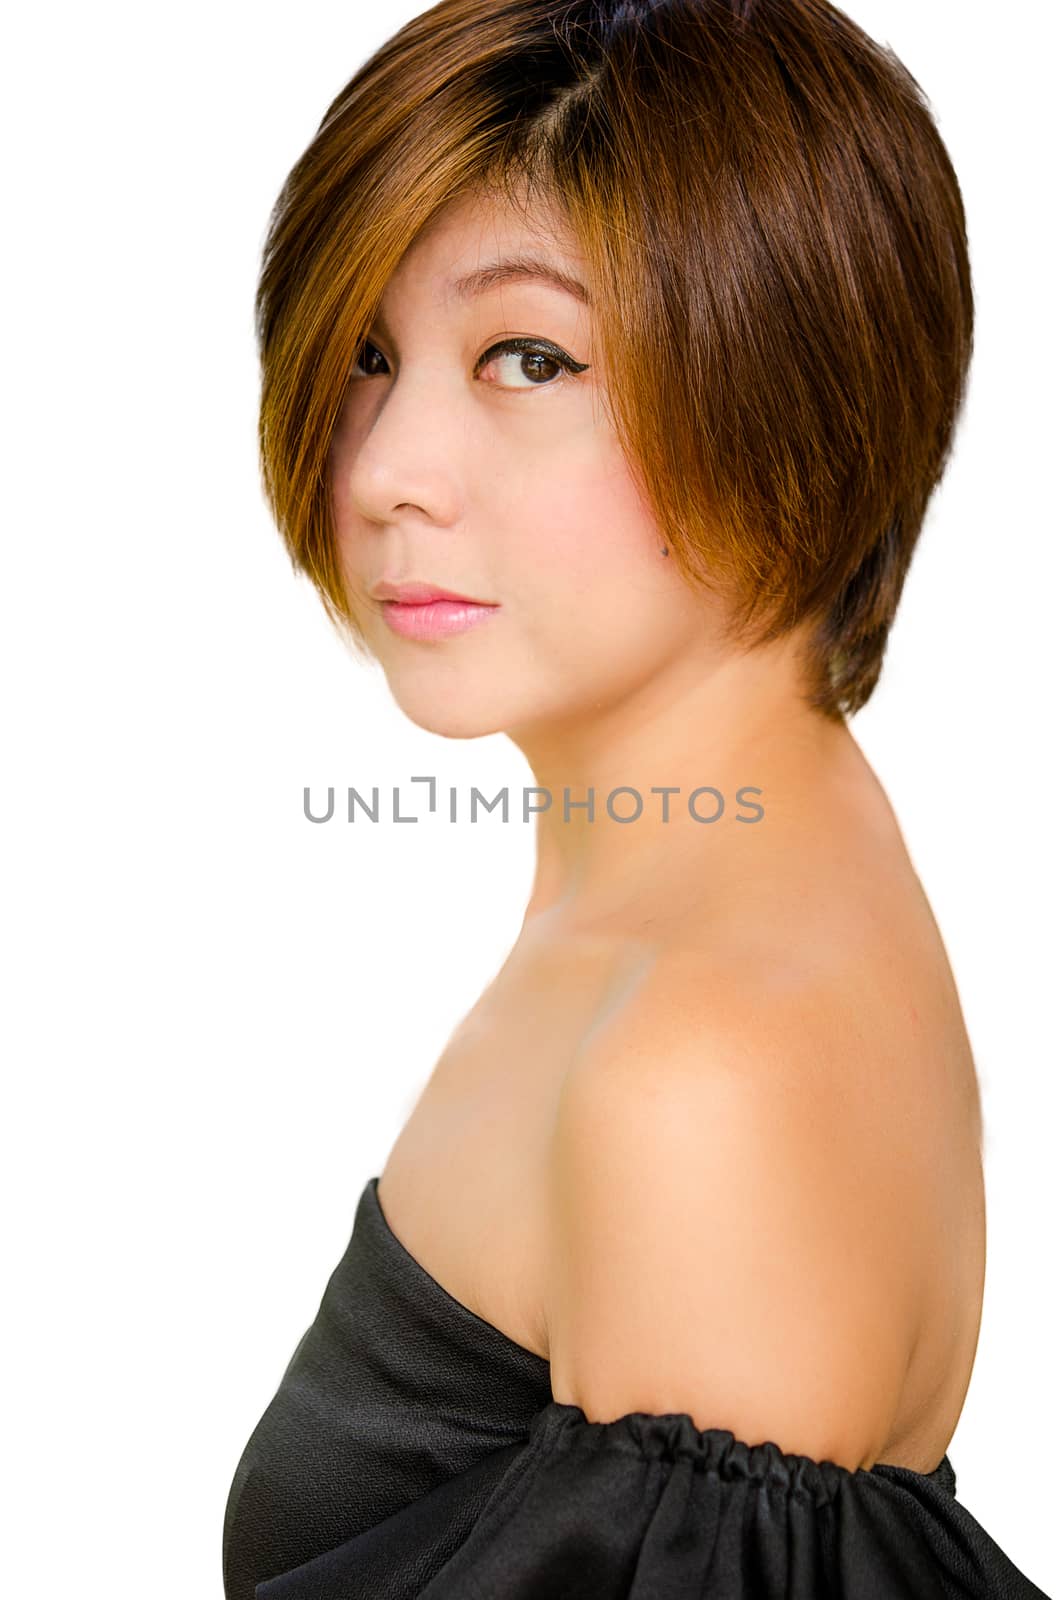 Portrait of a beautiful female model on white background